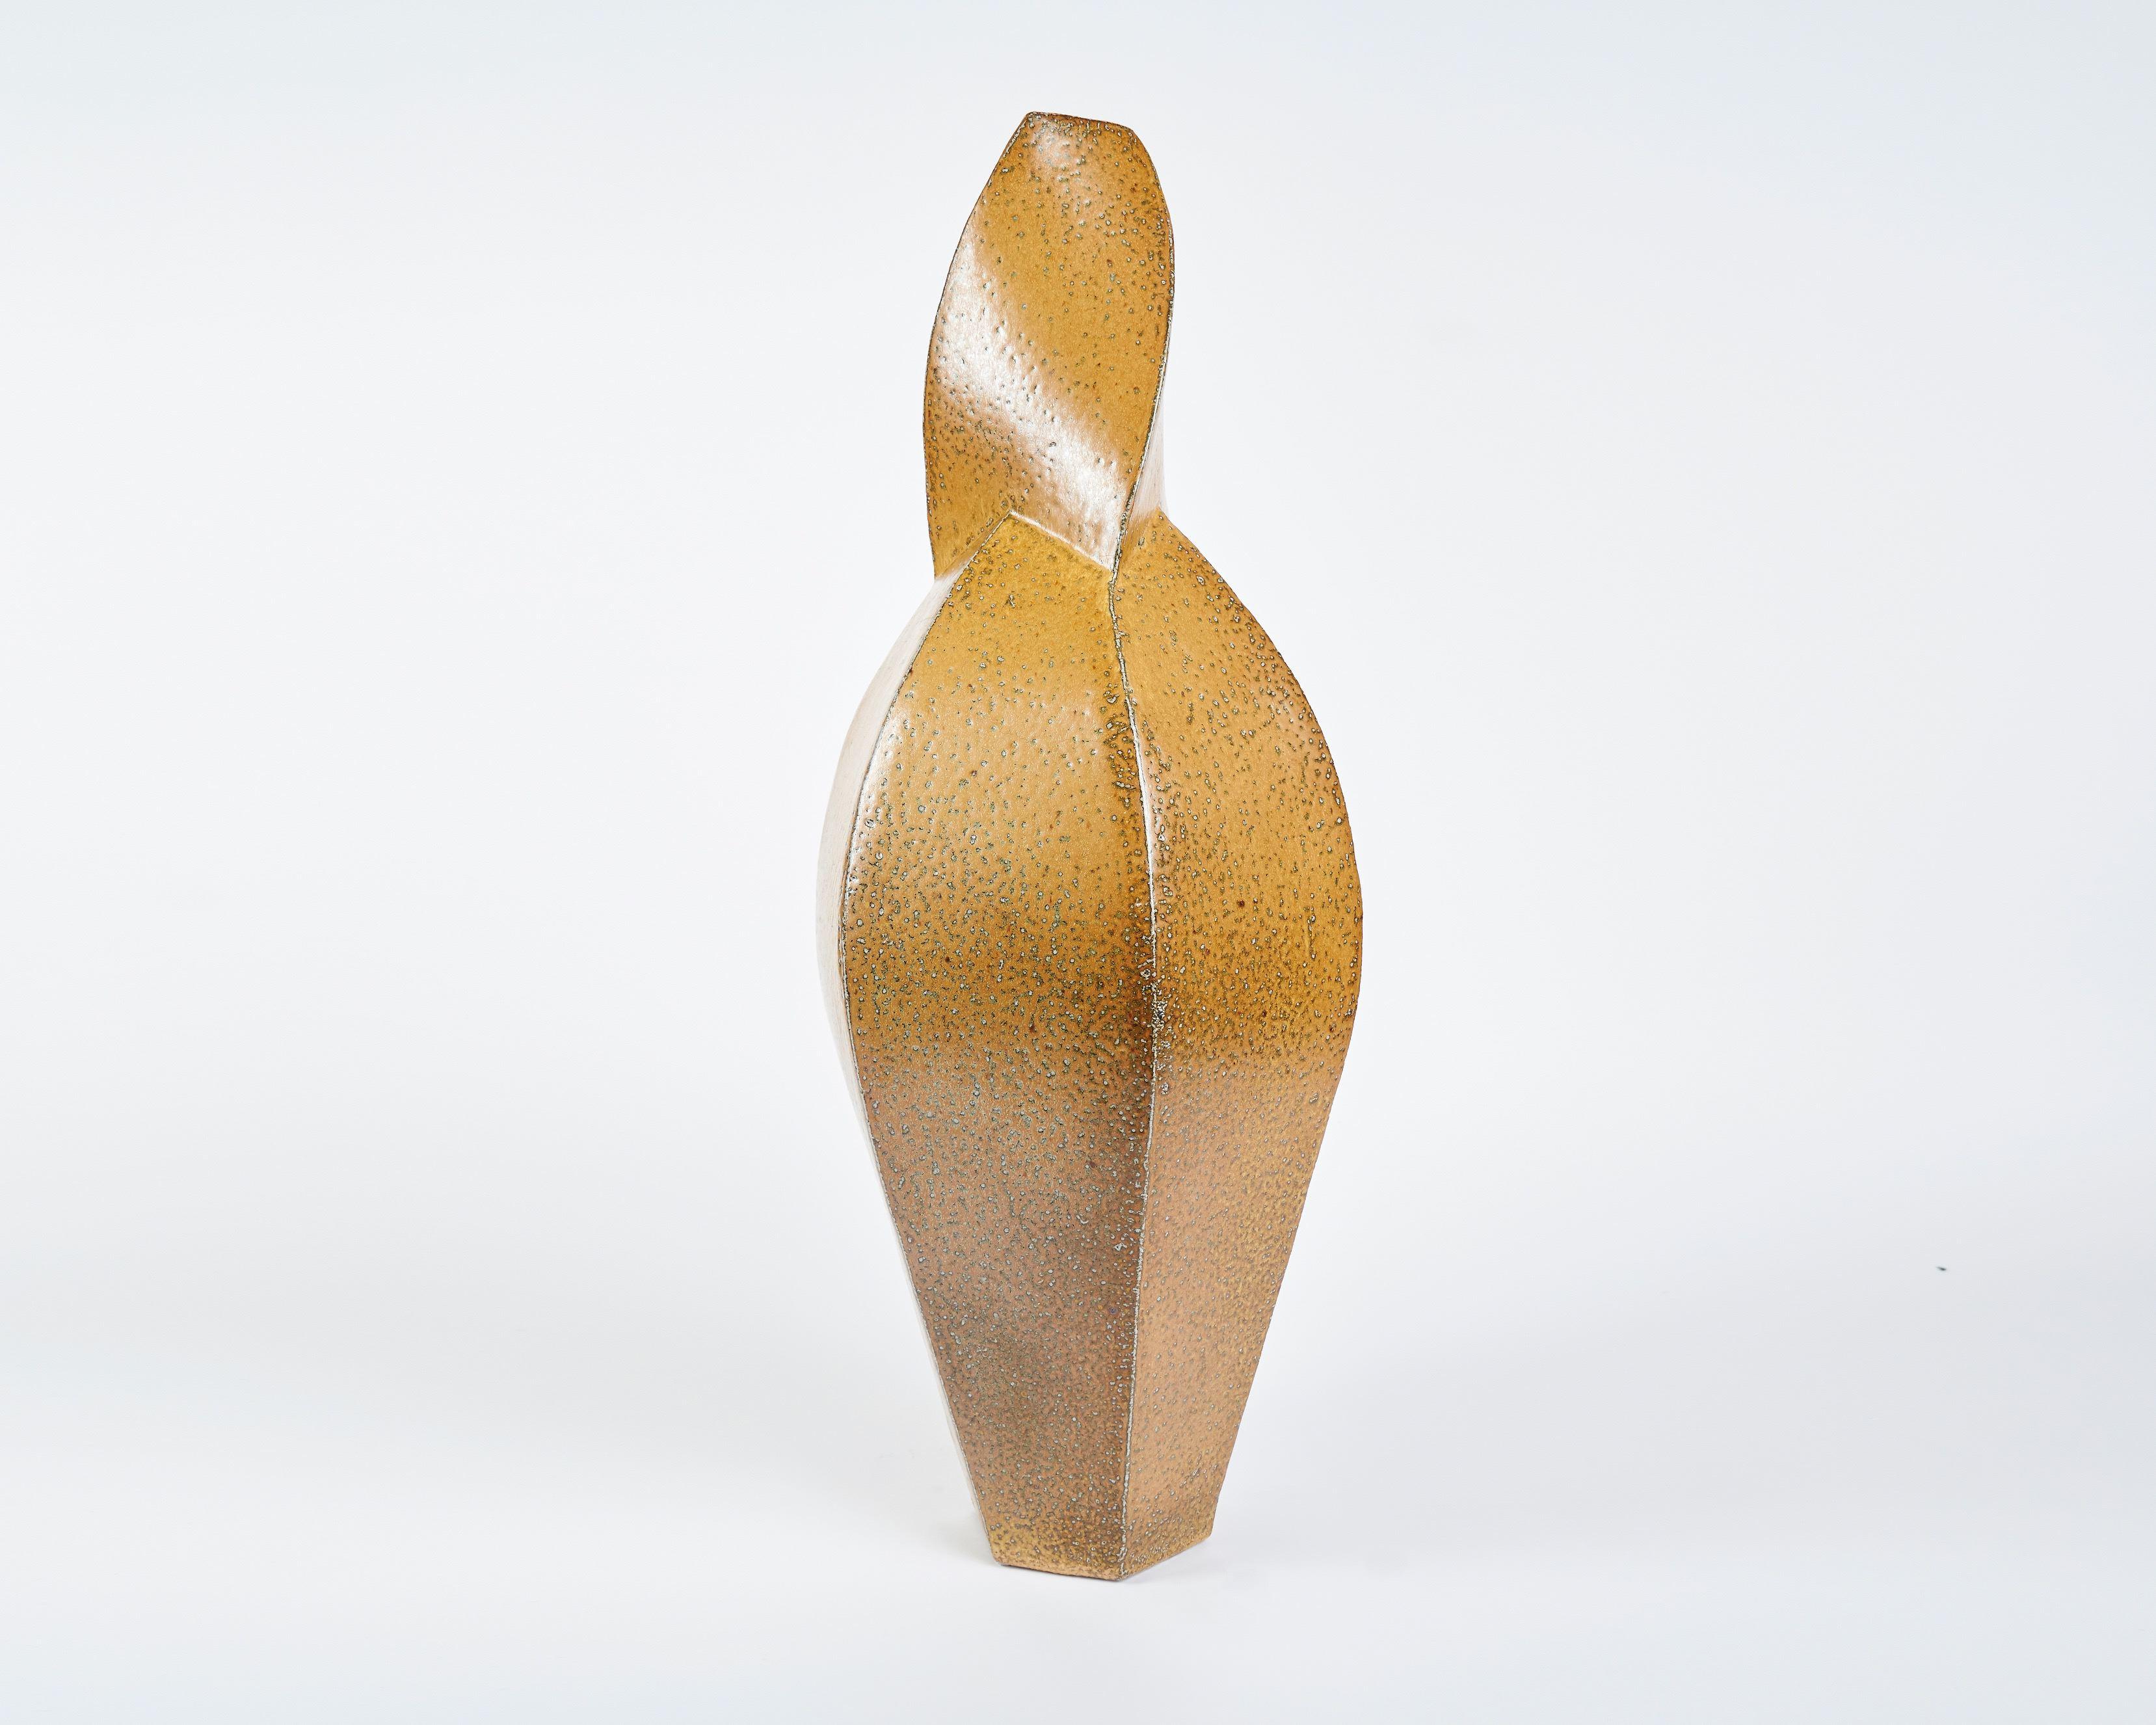 This twisted, faceted vase by contemporary Danish ceramicist Aage Birck, possess a rigidity and texture unique for the medium.